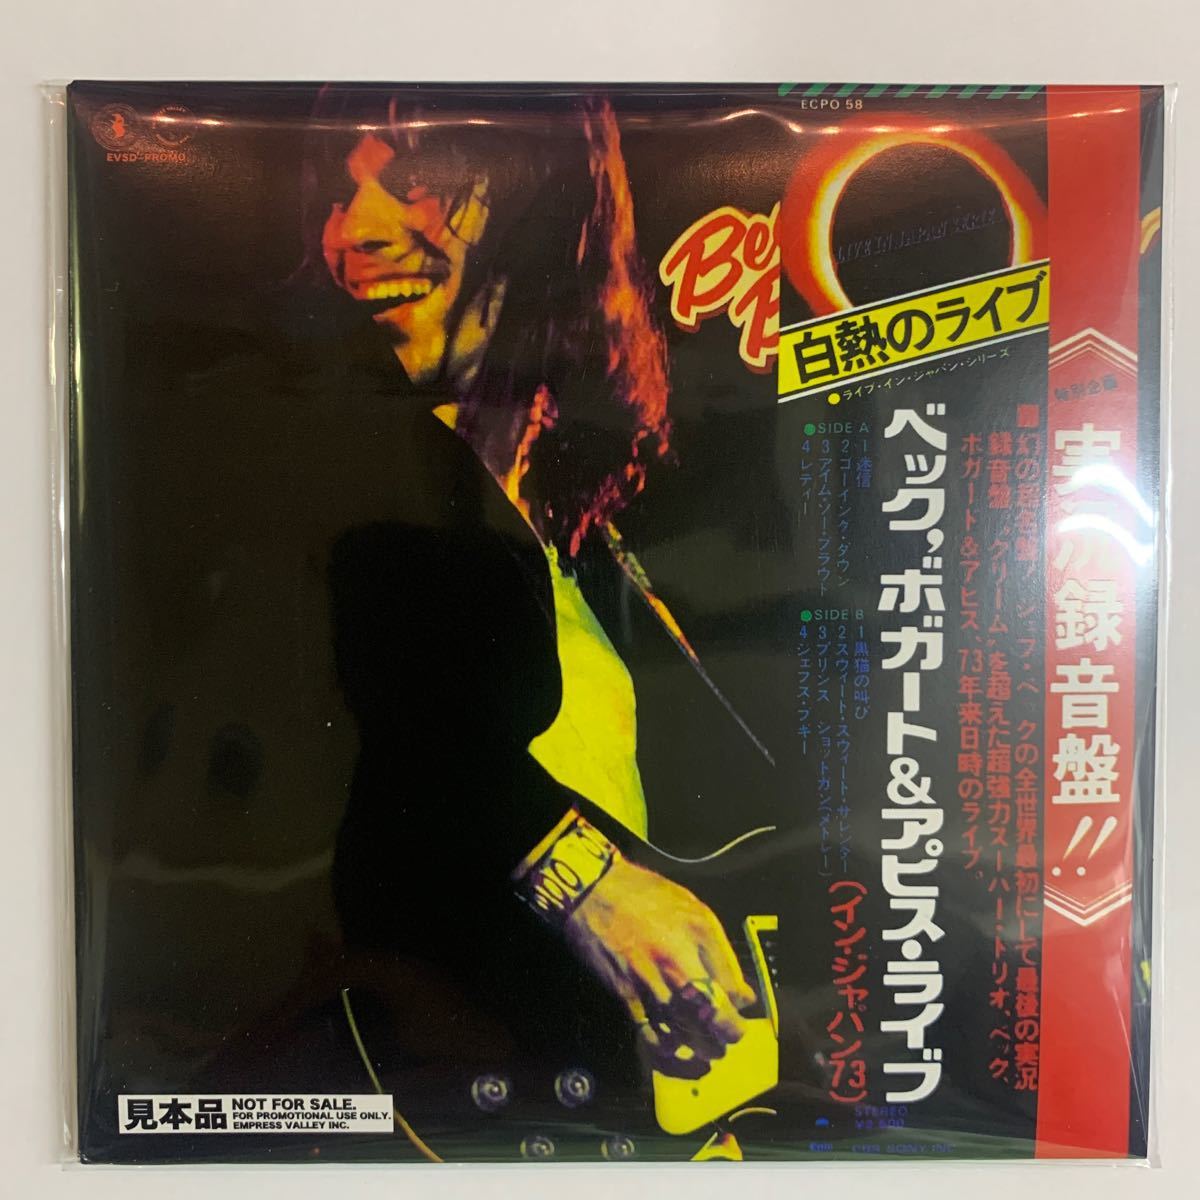 BECK, BOGERT & APPICE BBA / JEFF BECK GROUP / LIVE IN TOKYO 2CD 100セット限定盤！ボックスセットリリースに伴う販売促進用アイテム！の画像1